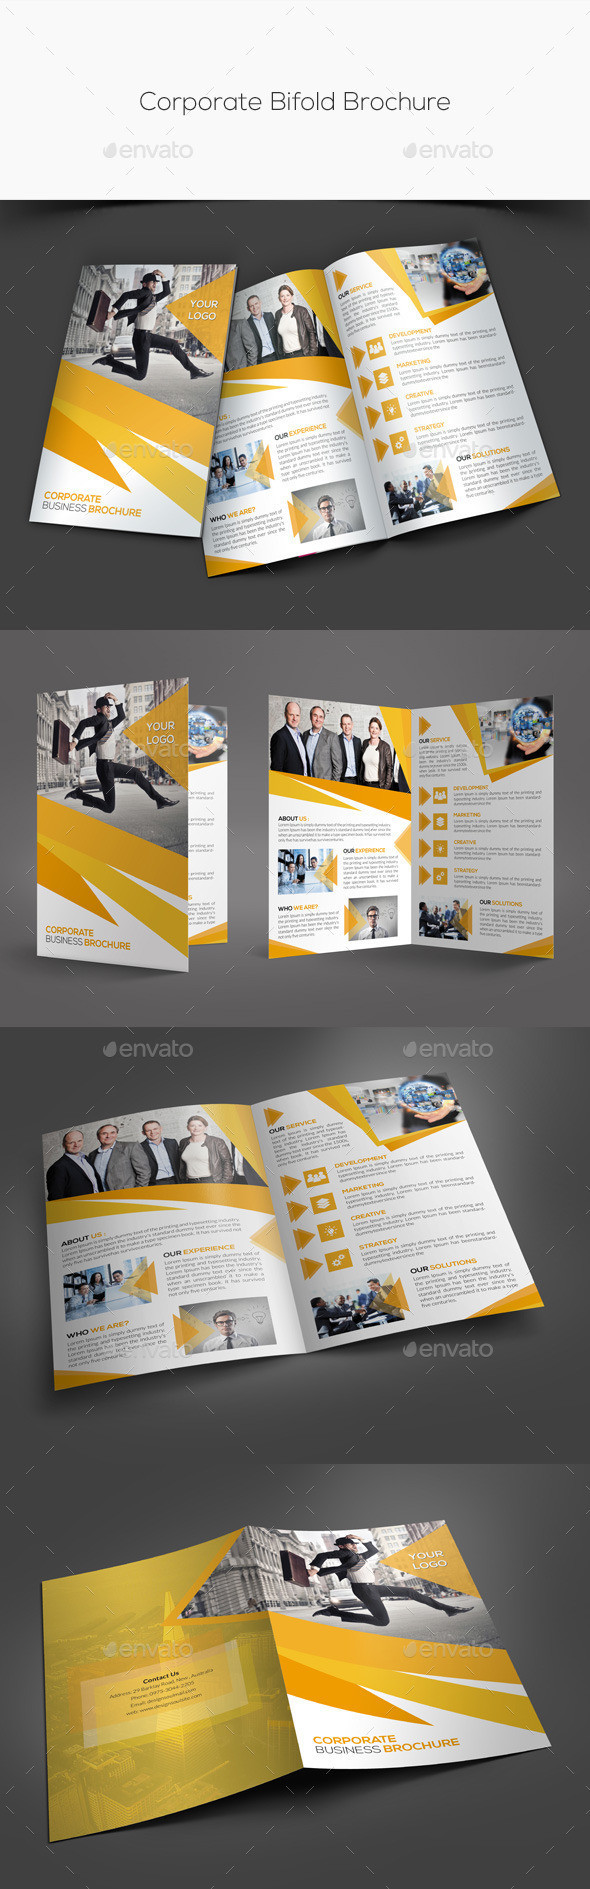 Corporate bifold brochure preview